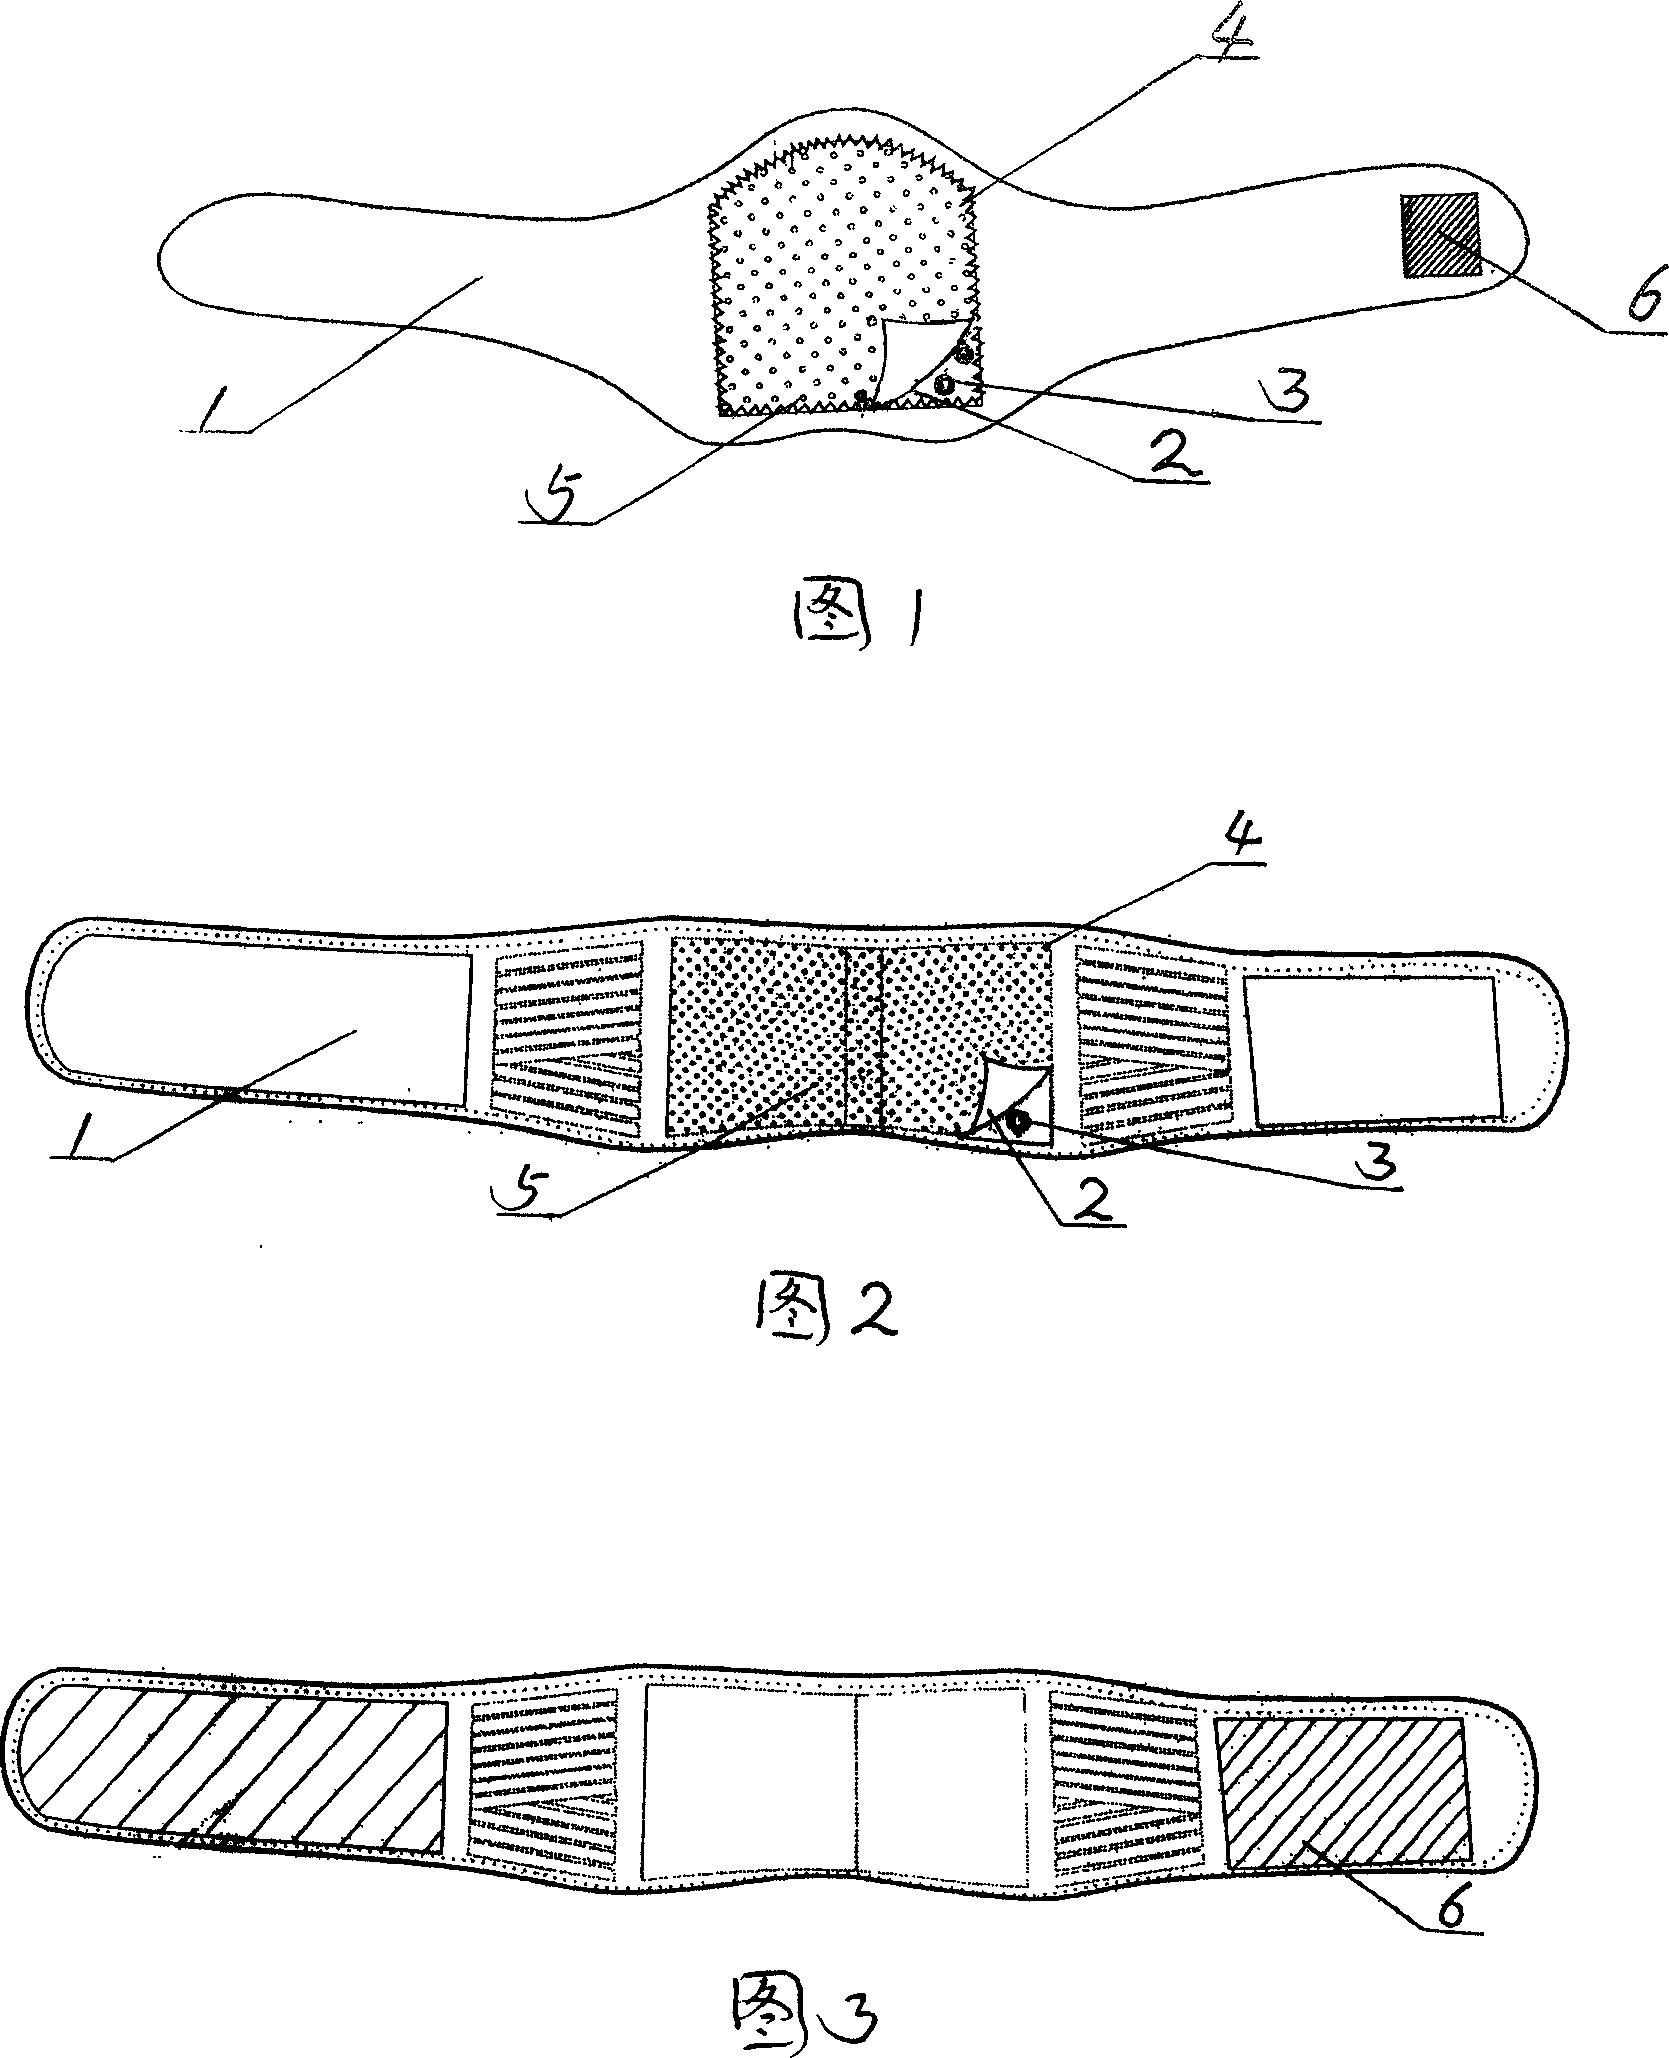 Self-heating medical treatment apparatus for treating cervical spondylosis and lumbar spondylosis co-operating with Chinese medicine soup